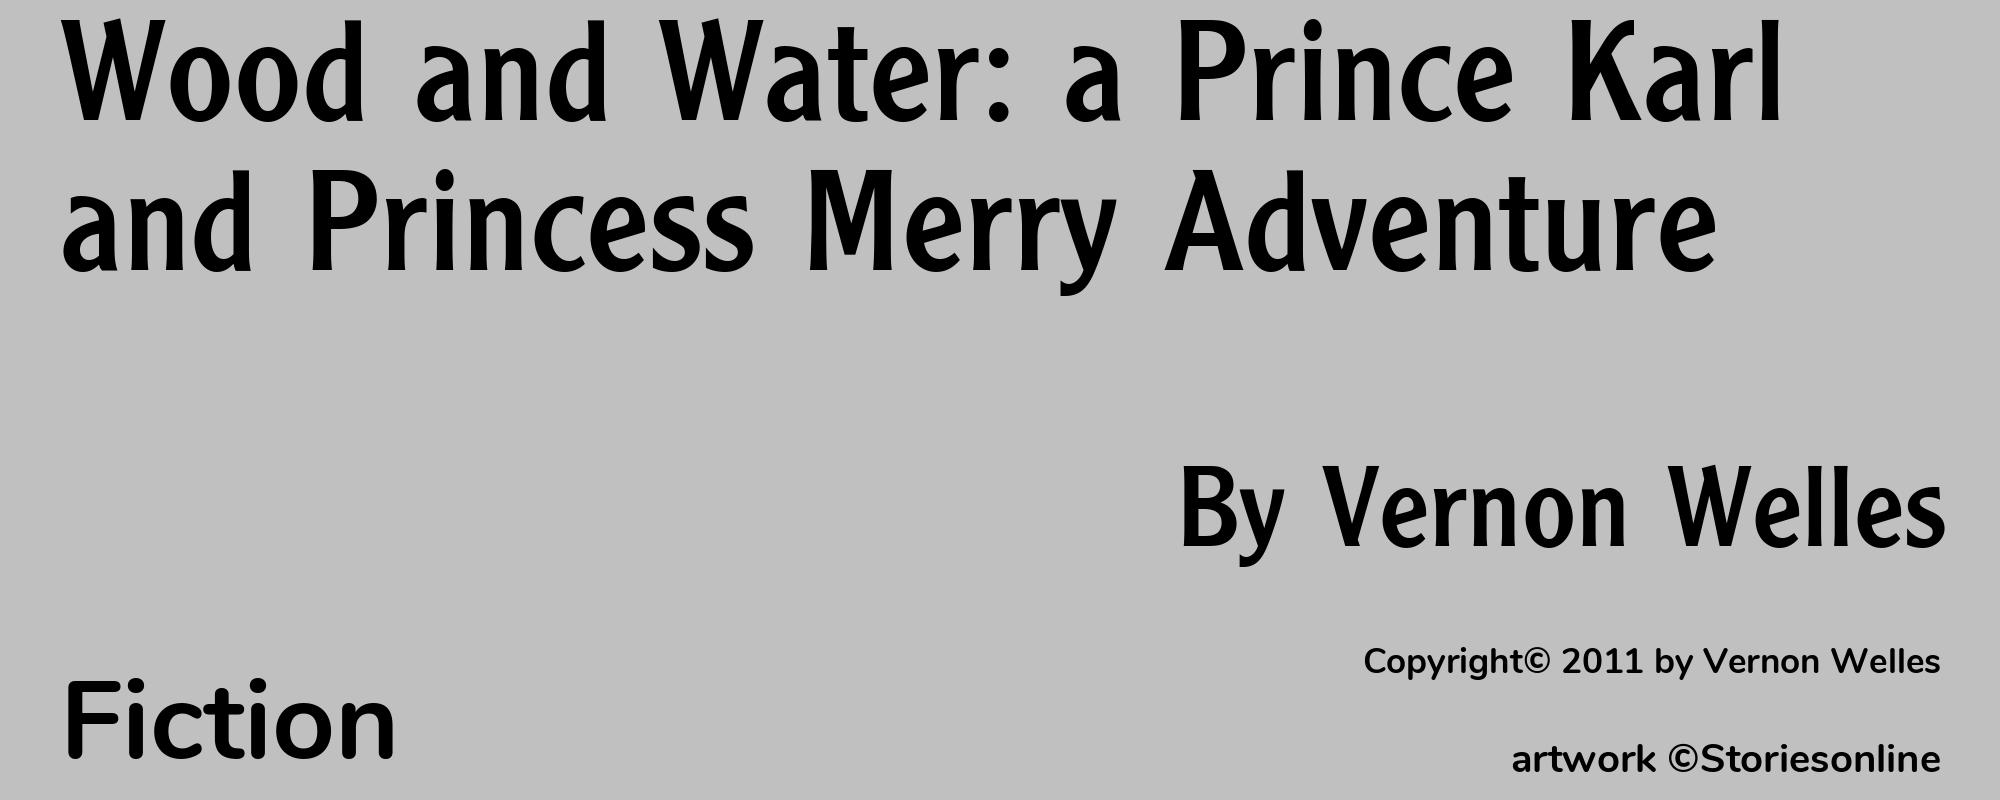 Wood and Water: a Prince Karl and Princess Merry Adventure - Cover